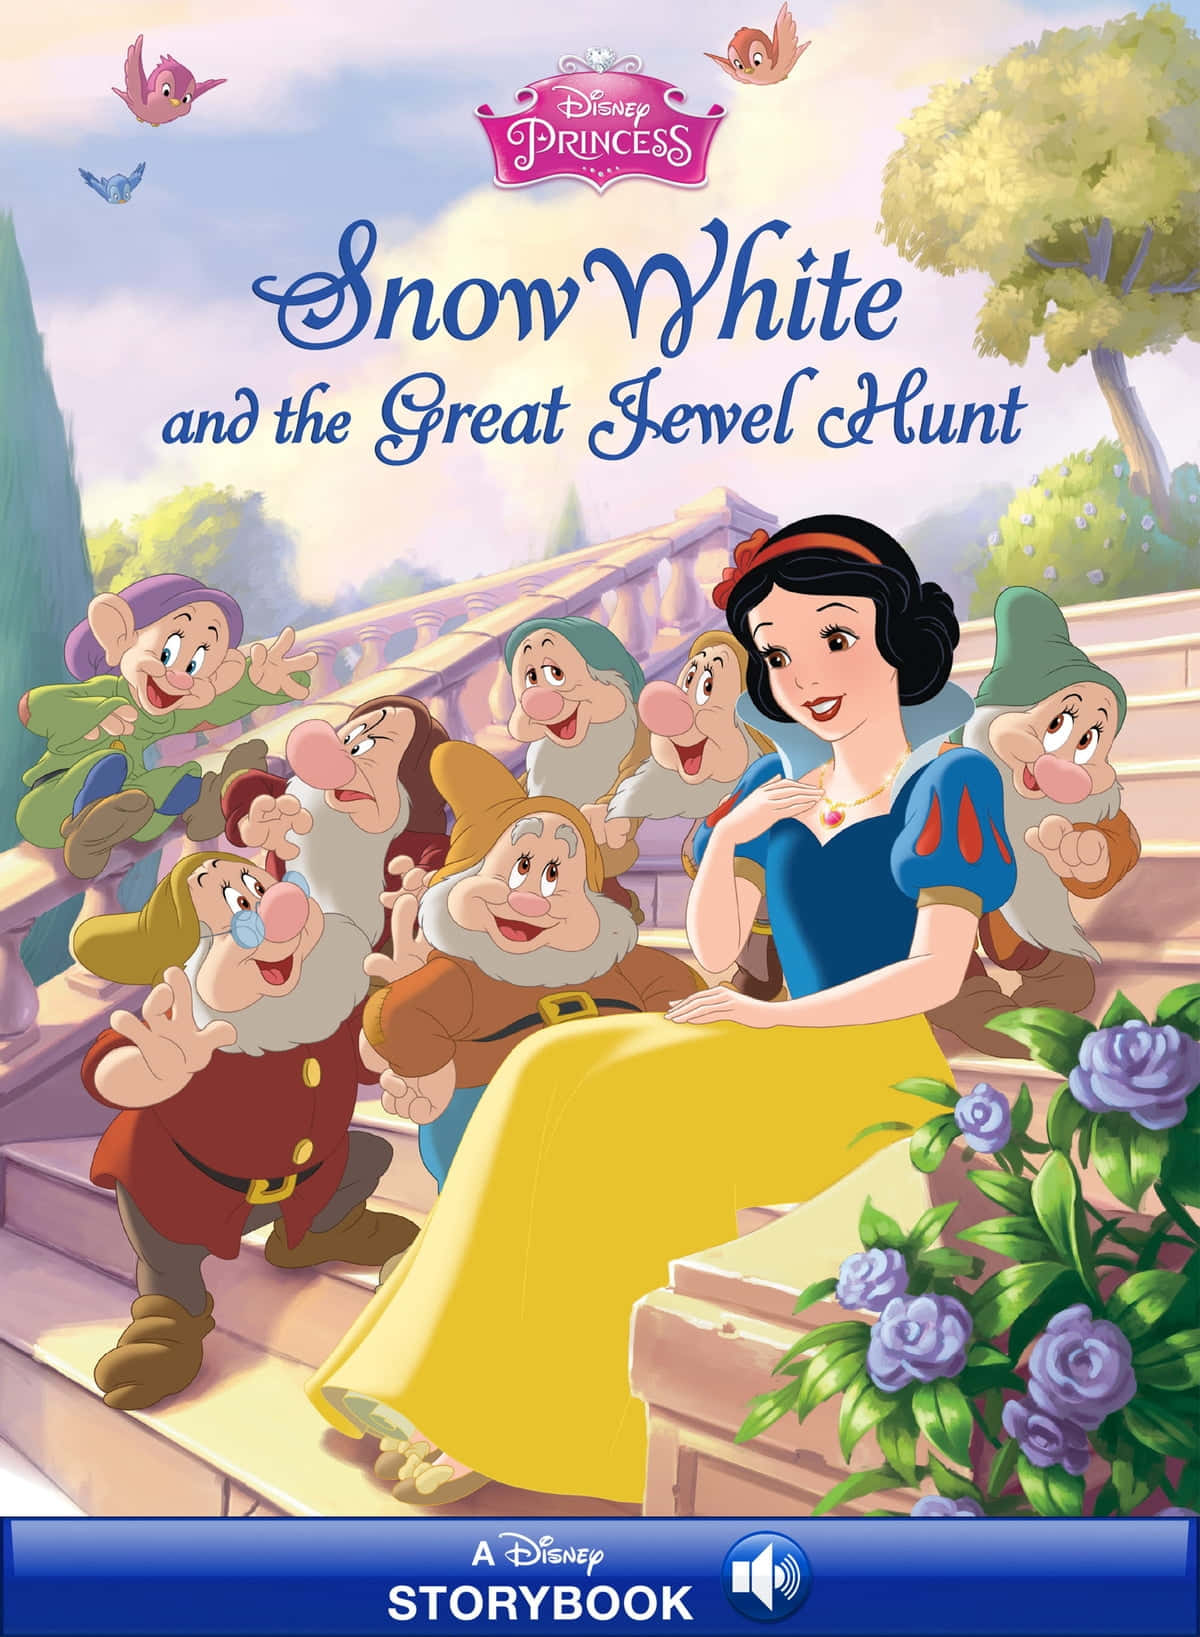 Snow White embracing her forest friends.